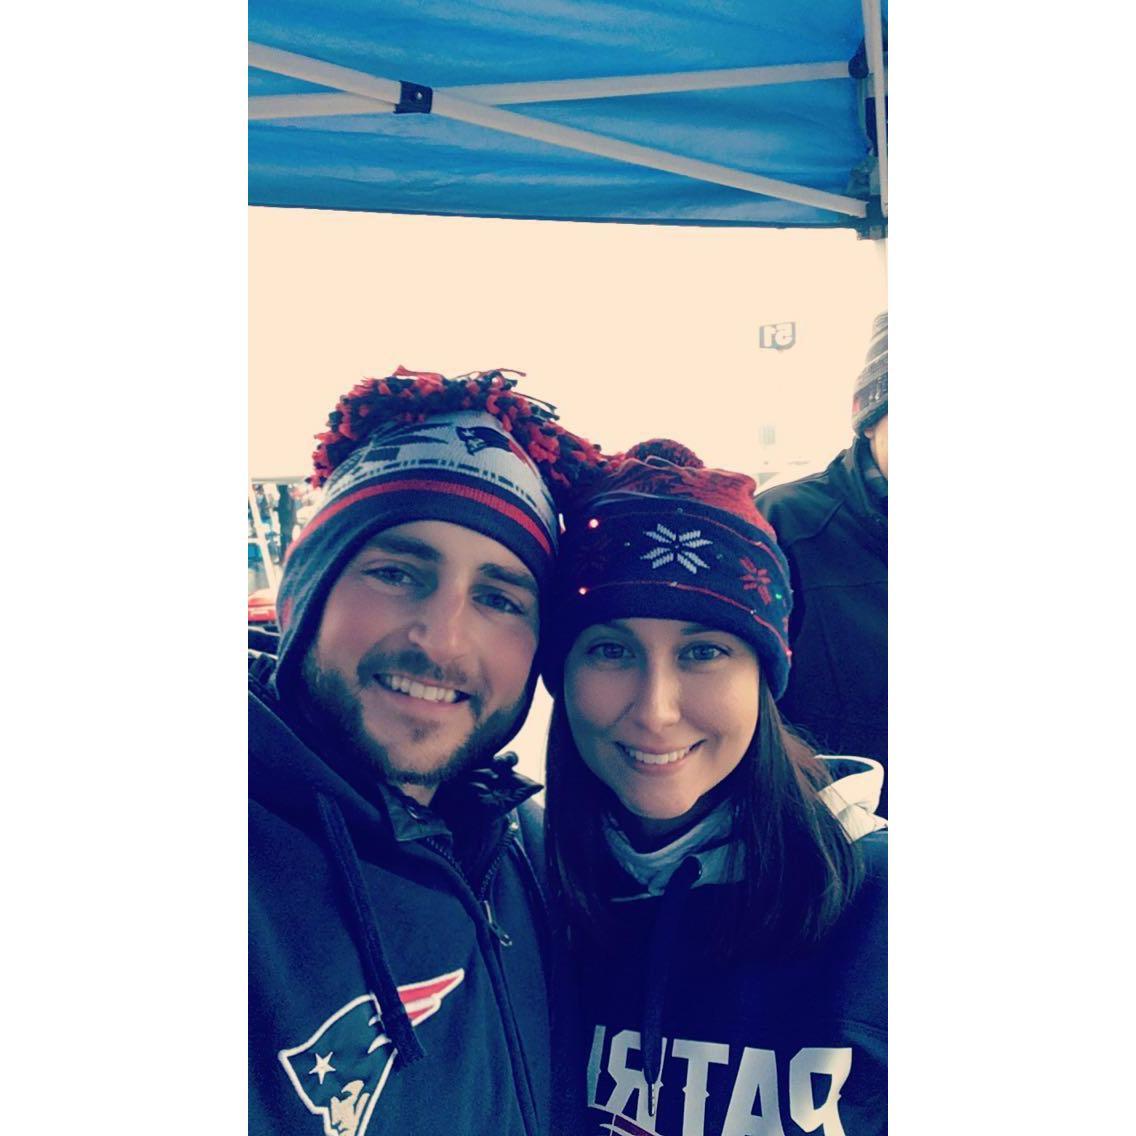 Sean brought me to my very first Patriot's game!